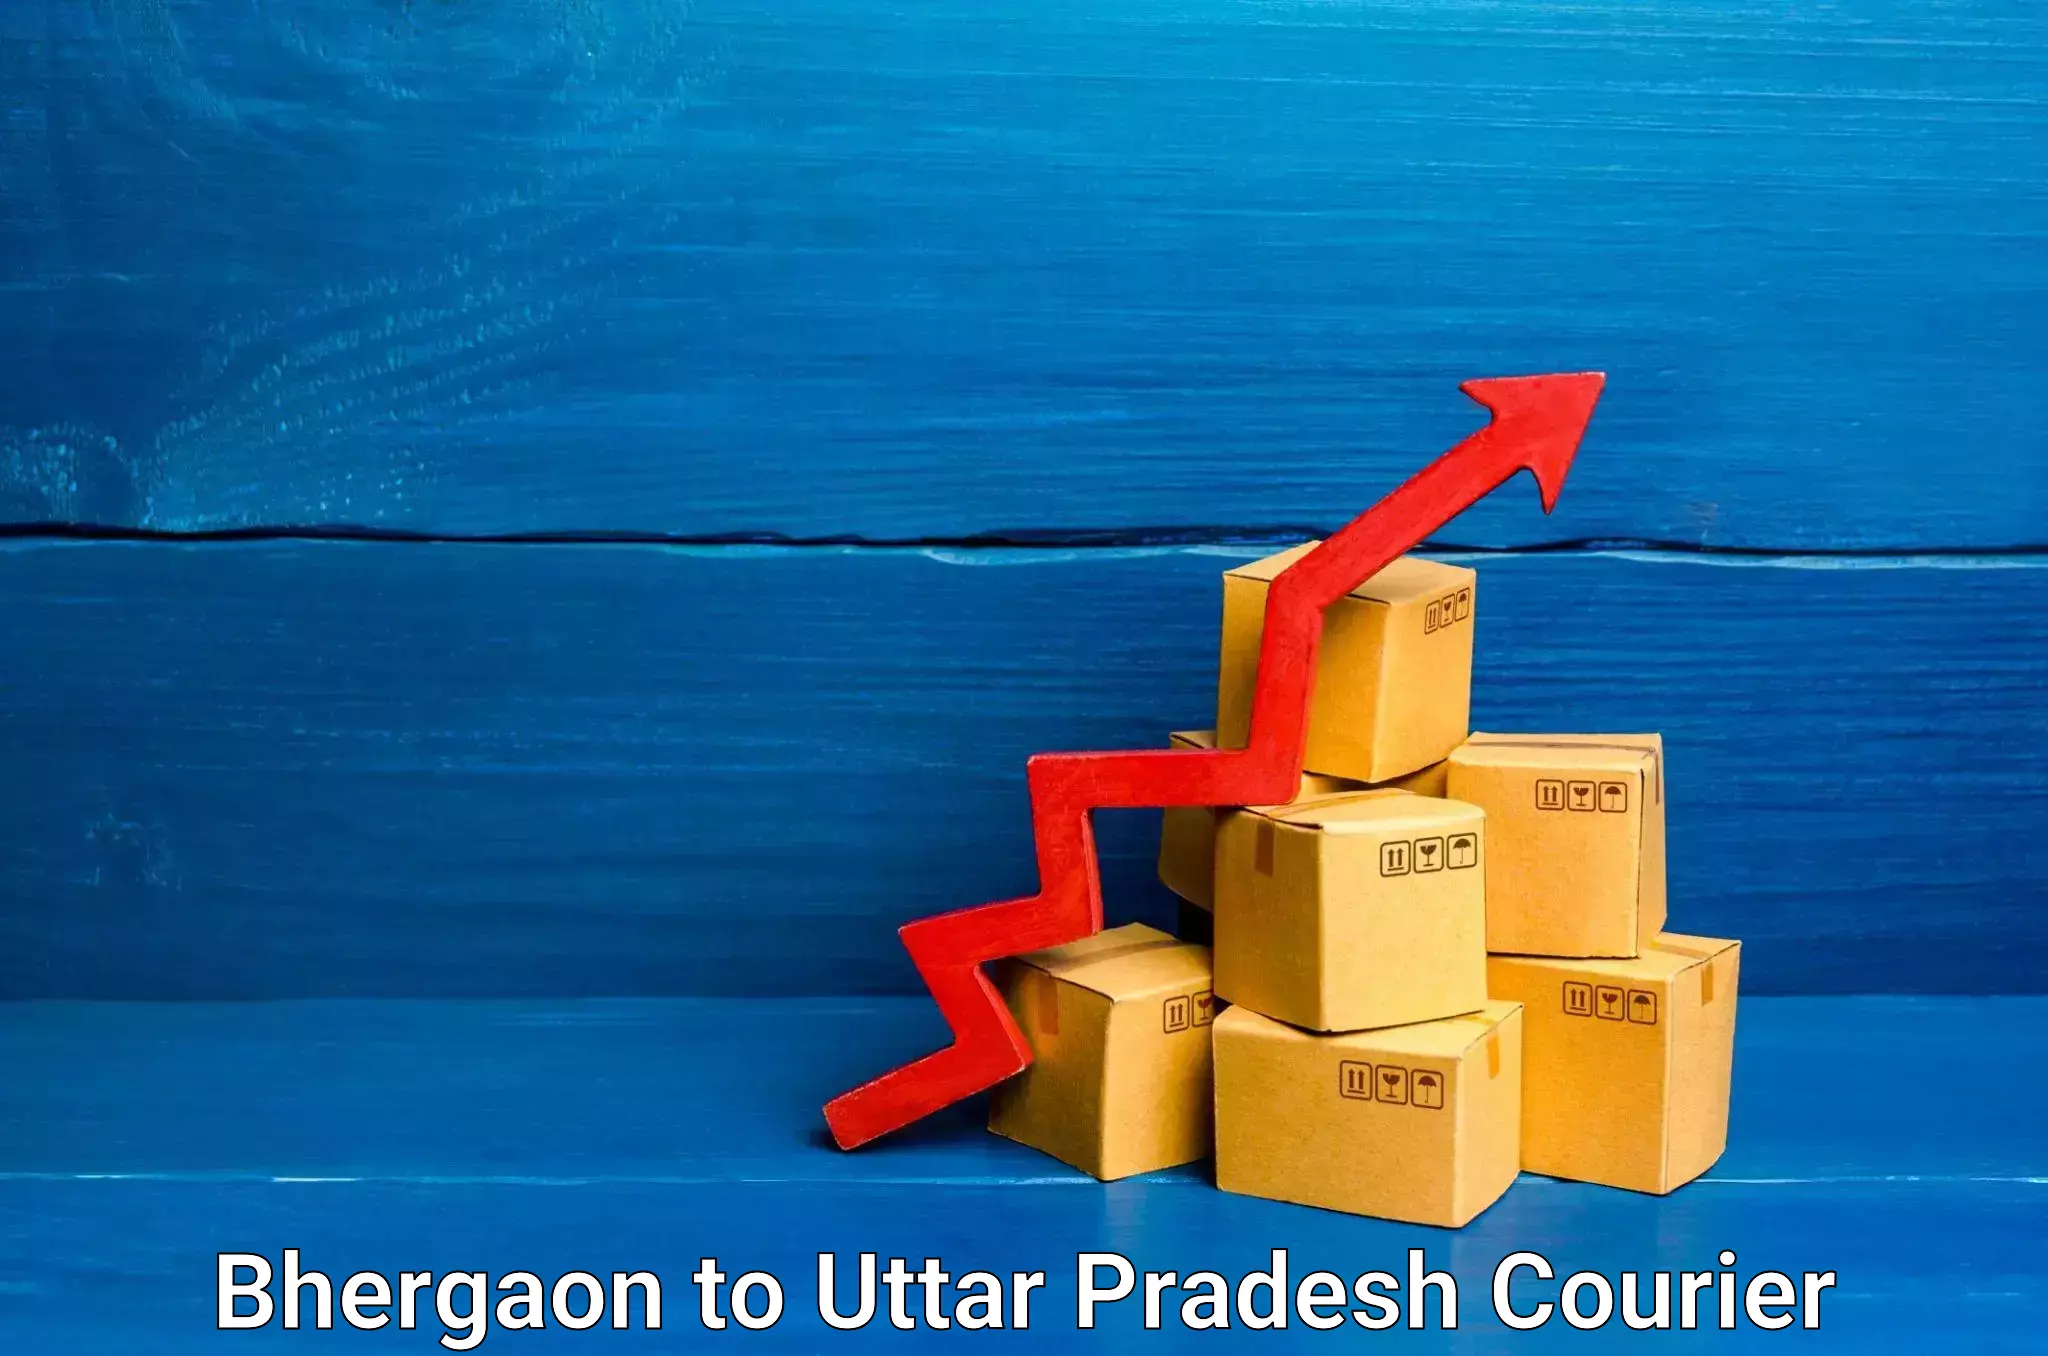 Quality courier partnerships Bhergaon to Agra